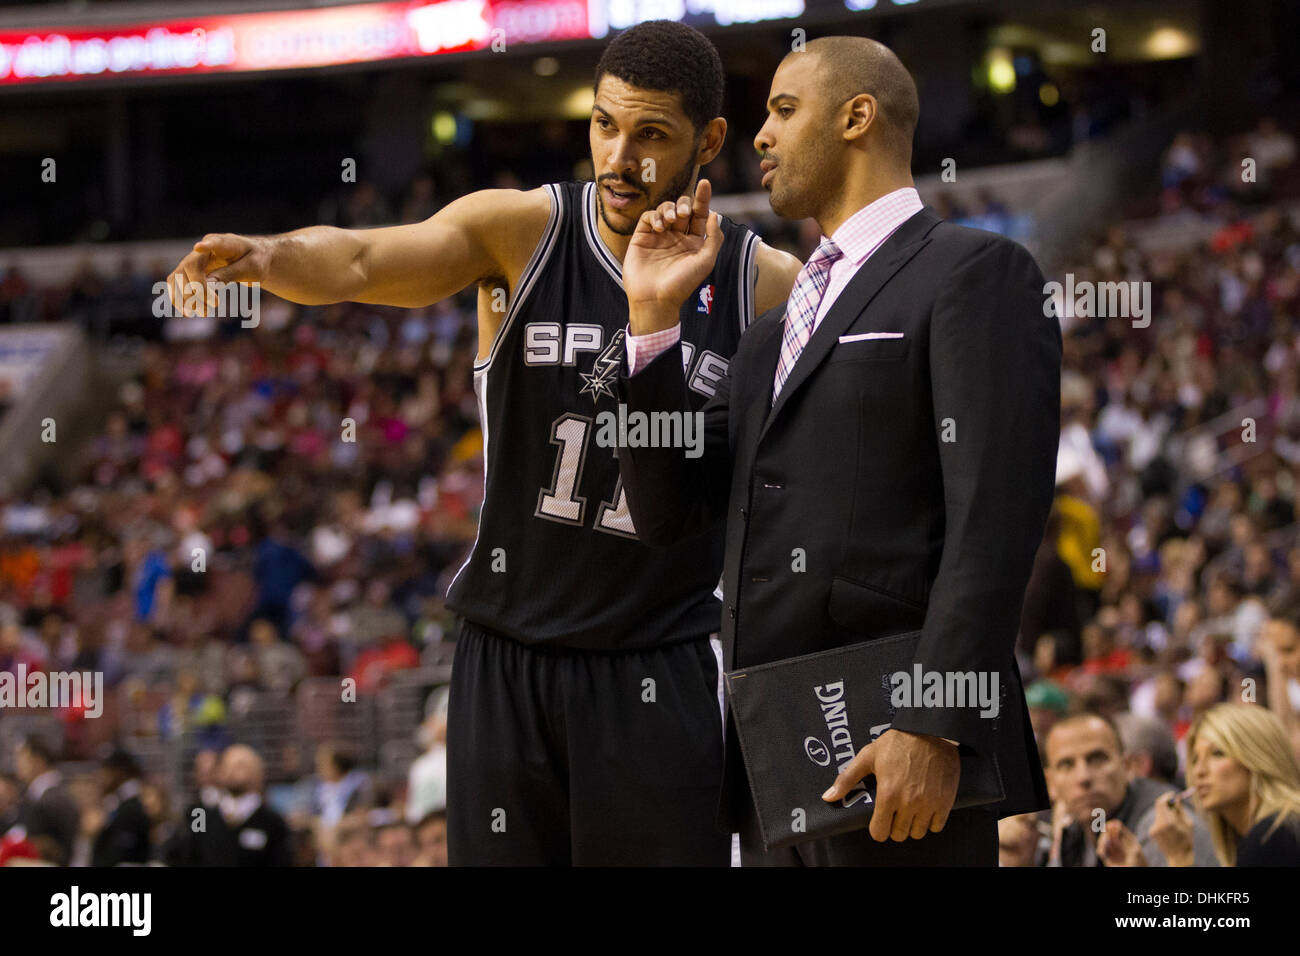 November 11, 2013: San Antonio Spurs power forward Jeff Ayres (11) points things out to assistant coach Ime Udoka during the NBA game between the San Antonio Spurs and the Philadelphia 76ers at the Wells Fargo Center in Philadelphia, Pennsylvania. The Spurs win 109-85. (Christopher Szagola/Cal Sport Media) Stock Photo